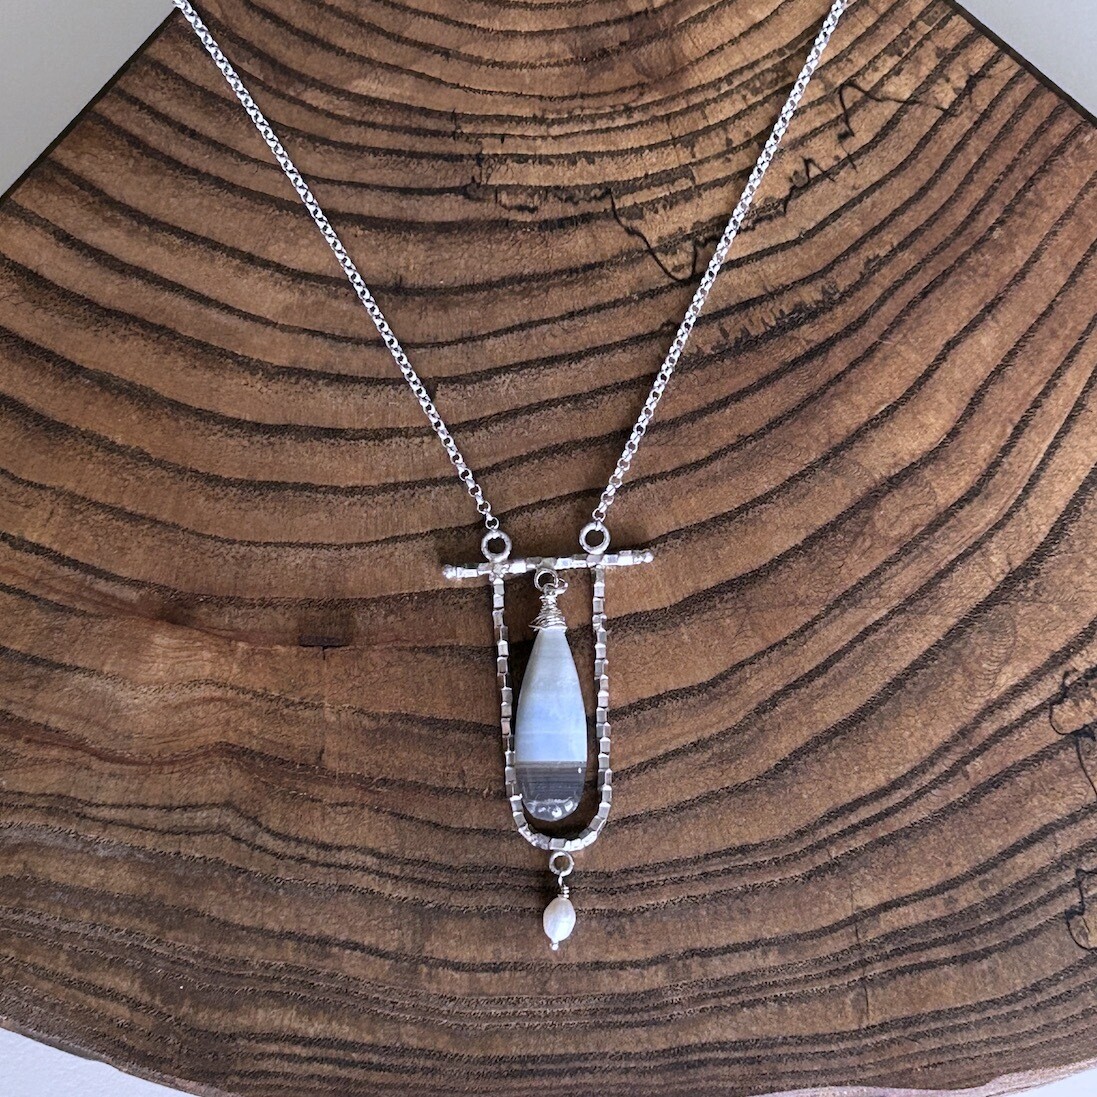 Handmade Silver Necklace with textured u with bar, blue opal, white pearl